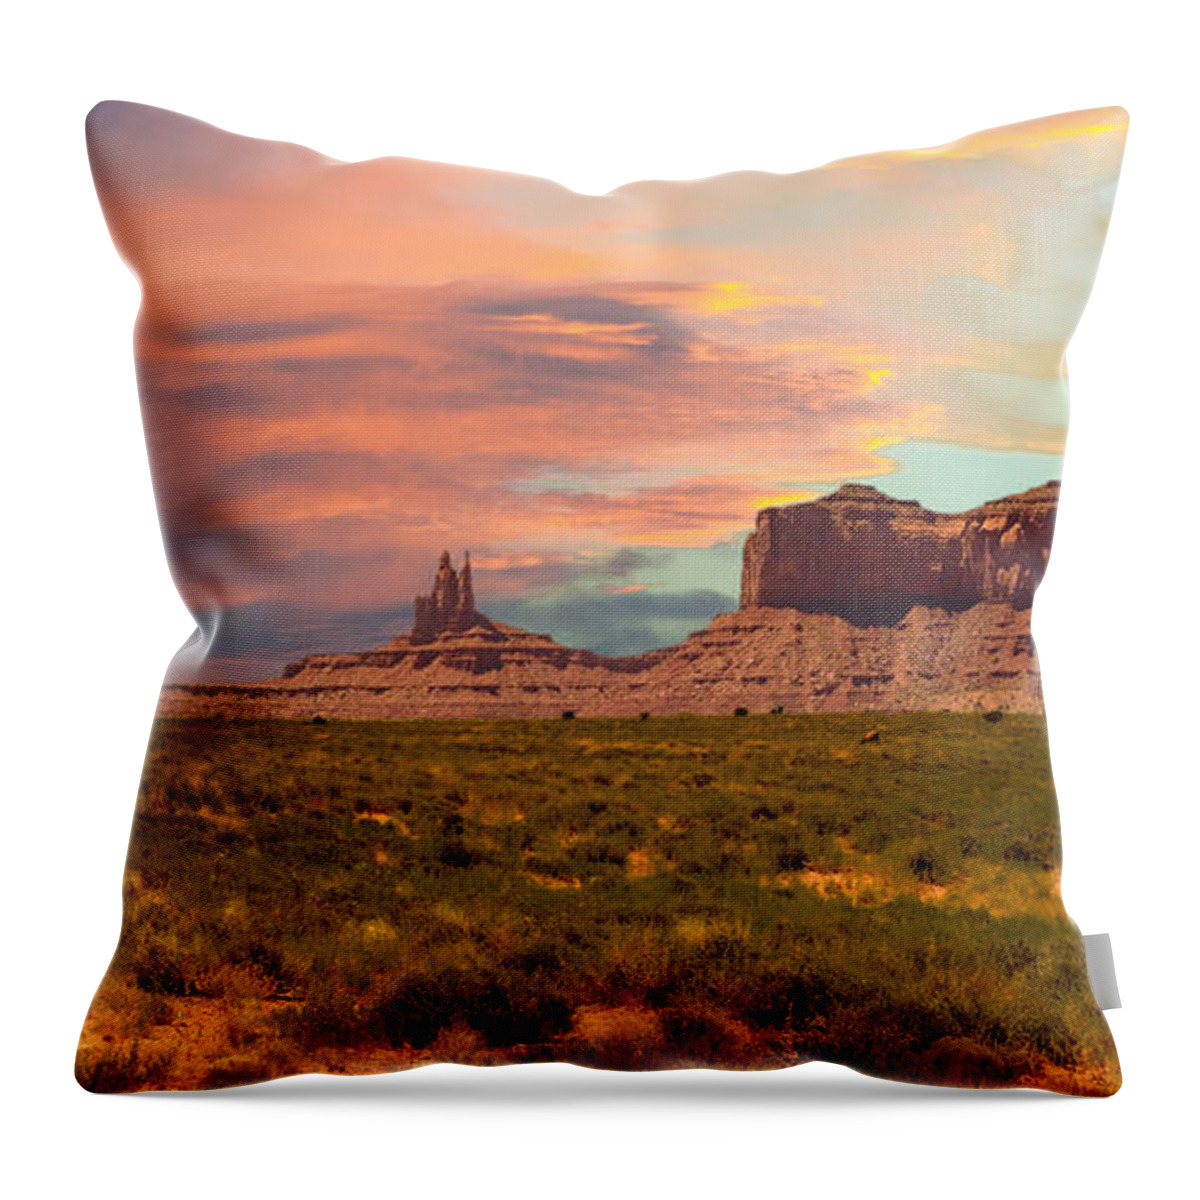 Sunset Throw Pillow featuring the photograph Monument Valley Landscape Vista by G Lamar Yancy